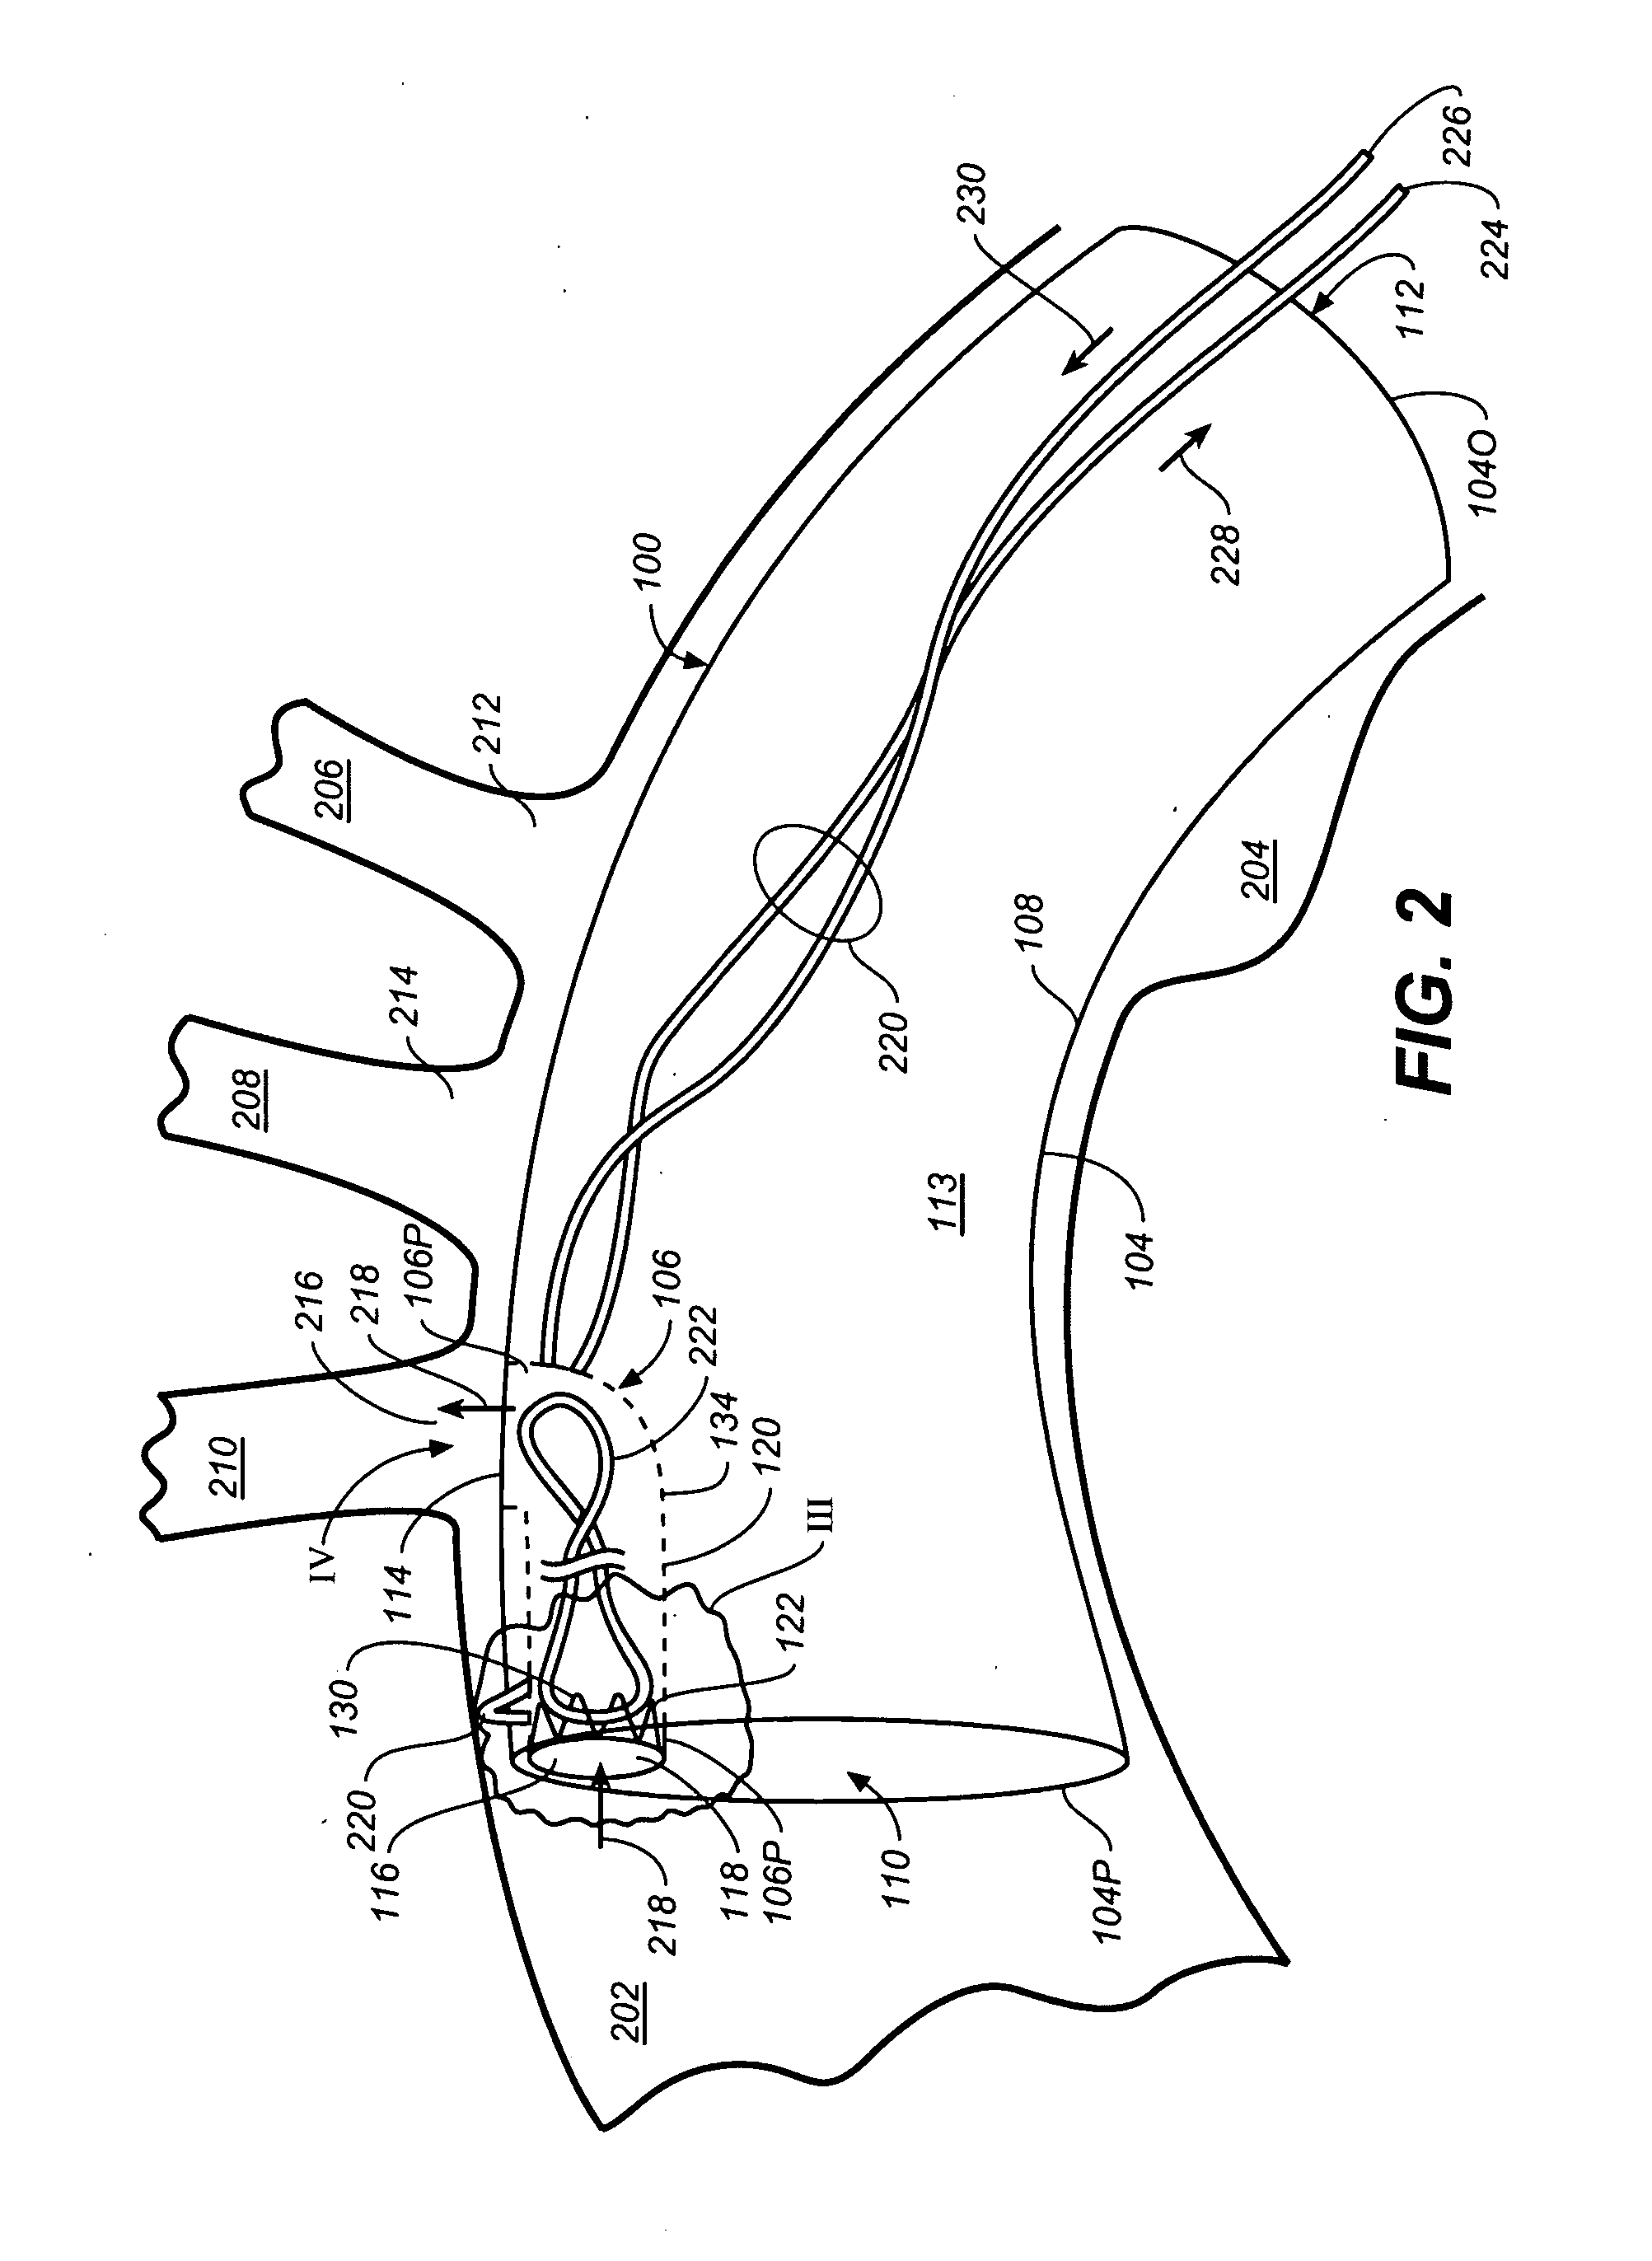 Eversible Branch Stent-Graft and Deployment Method